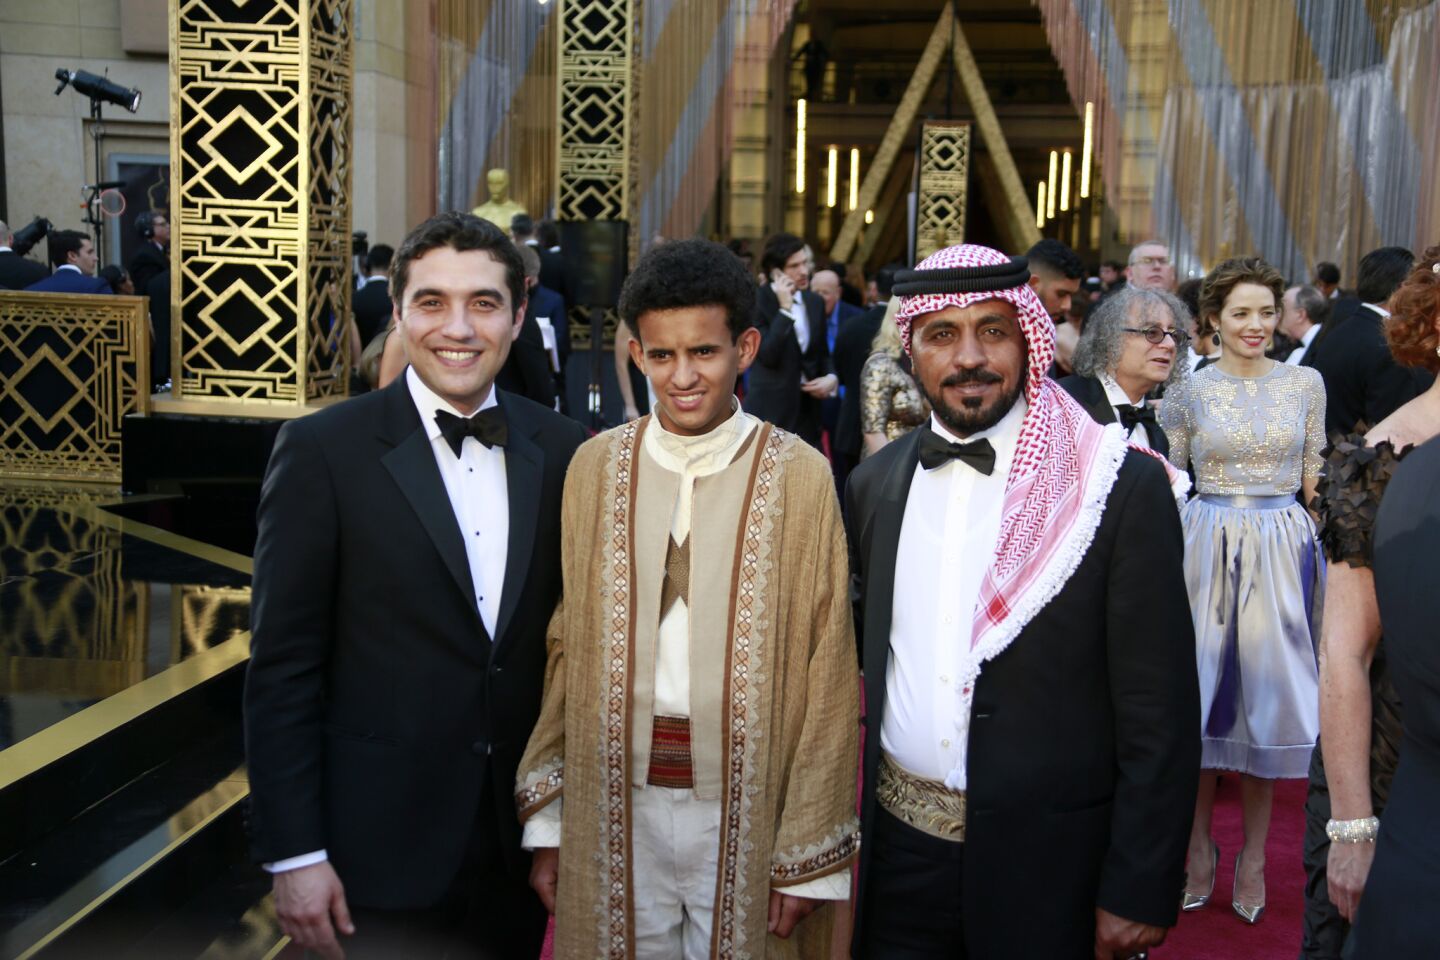 Jordan's foreign-language nominee "Theeb" is represented by, from left, director Naji Abu Nowar and actors Jacir Eid and Hassan Mutlag Al-Maraiyeh.